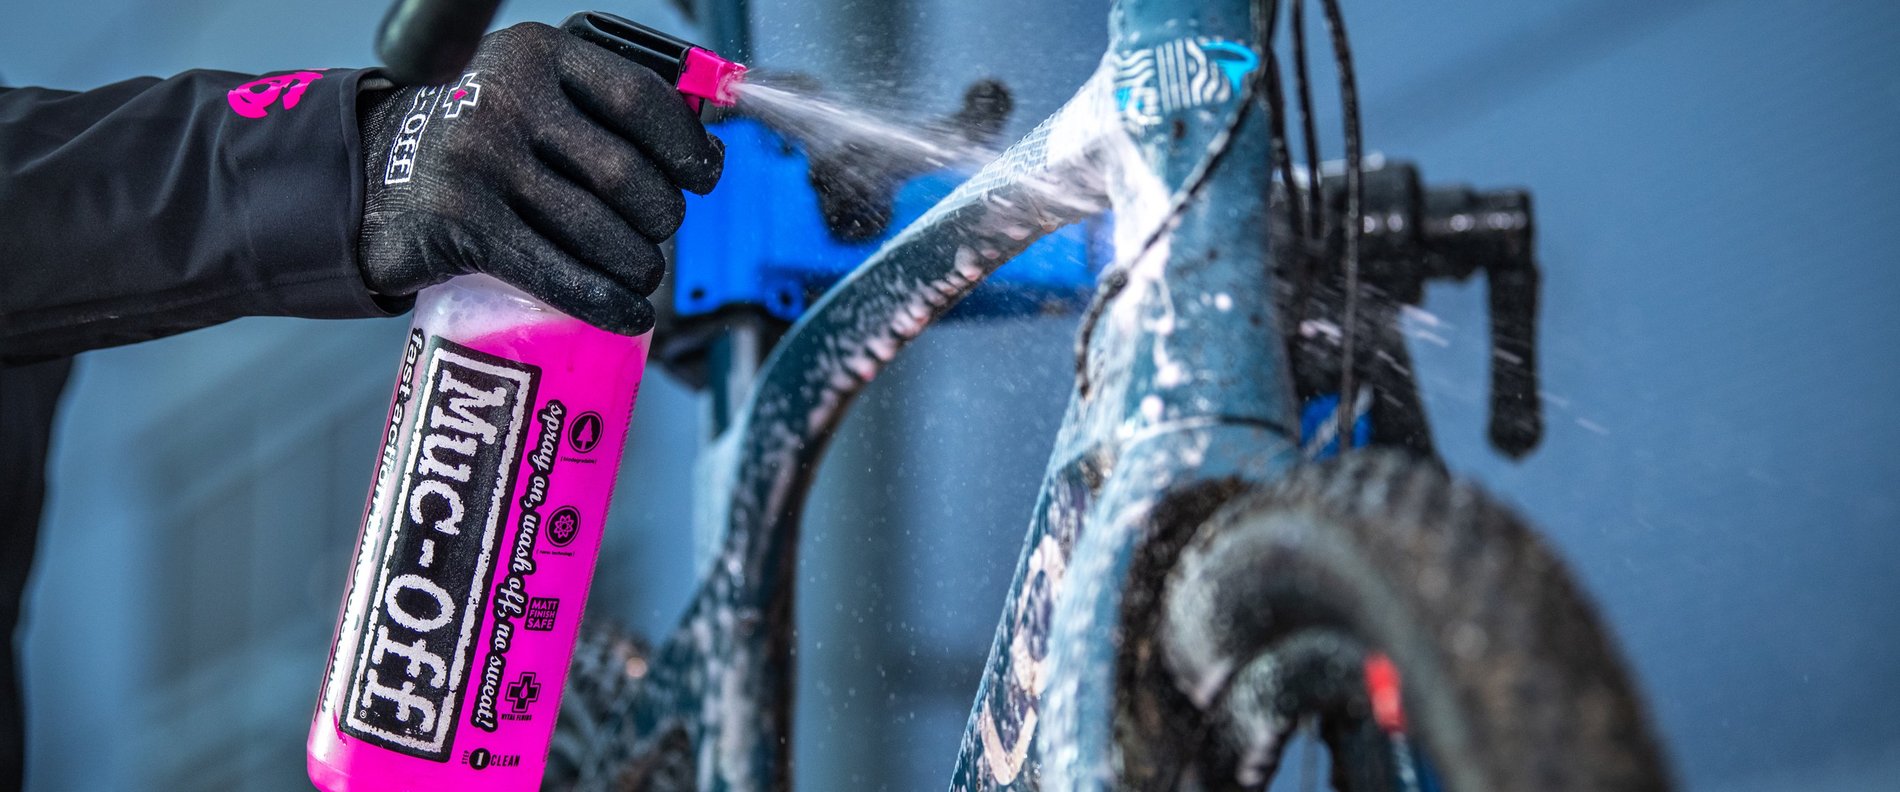 Bike Cleaning Products